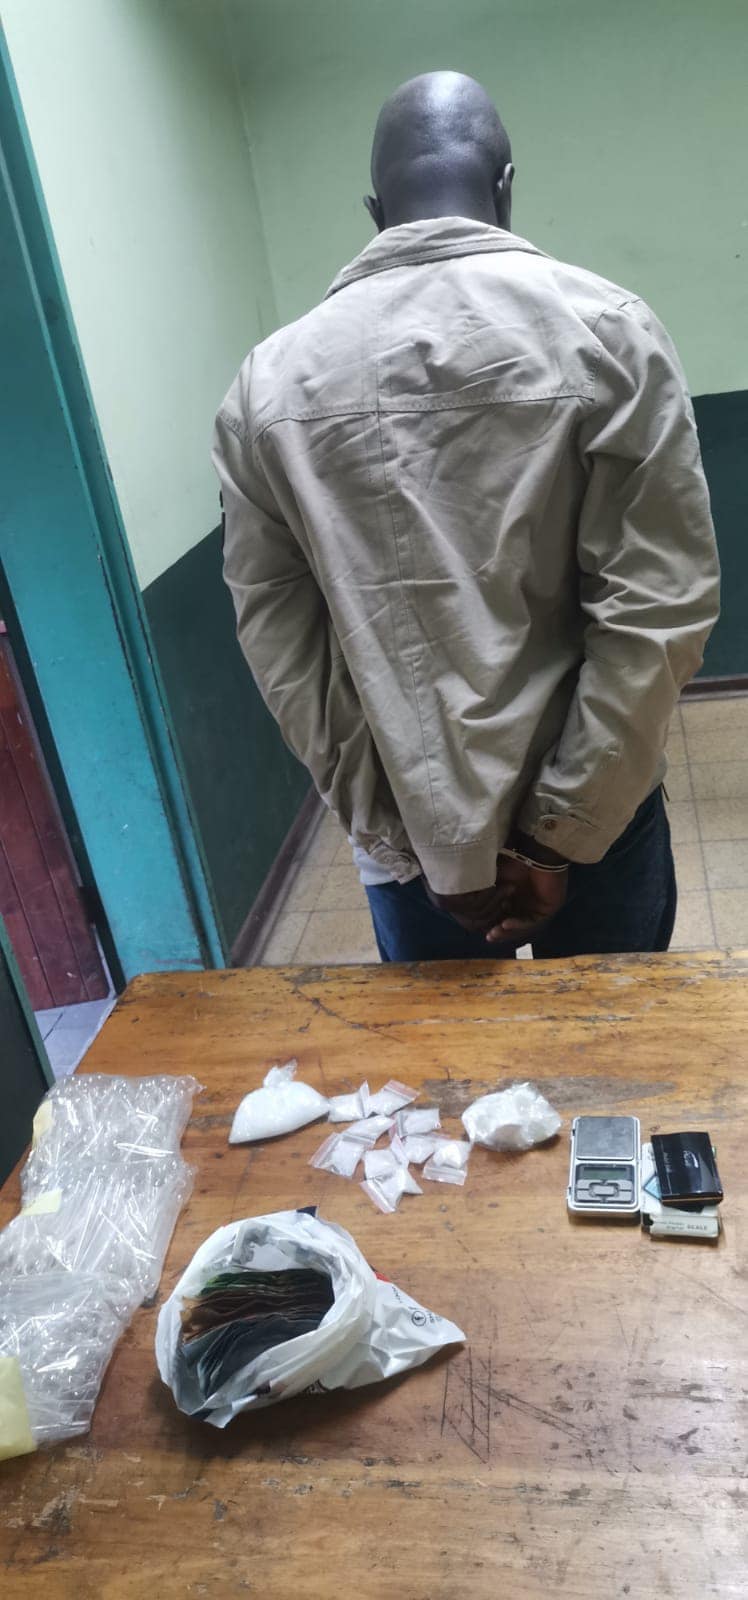 Over R70k worth of illegal substances were confiscated, one suspect behind bars in the Germiston area